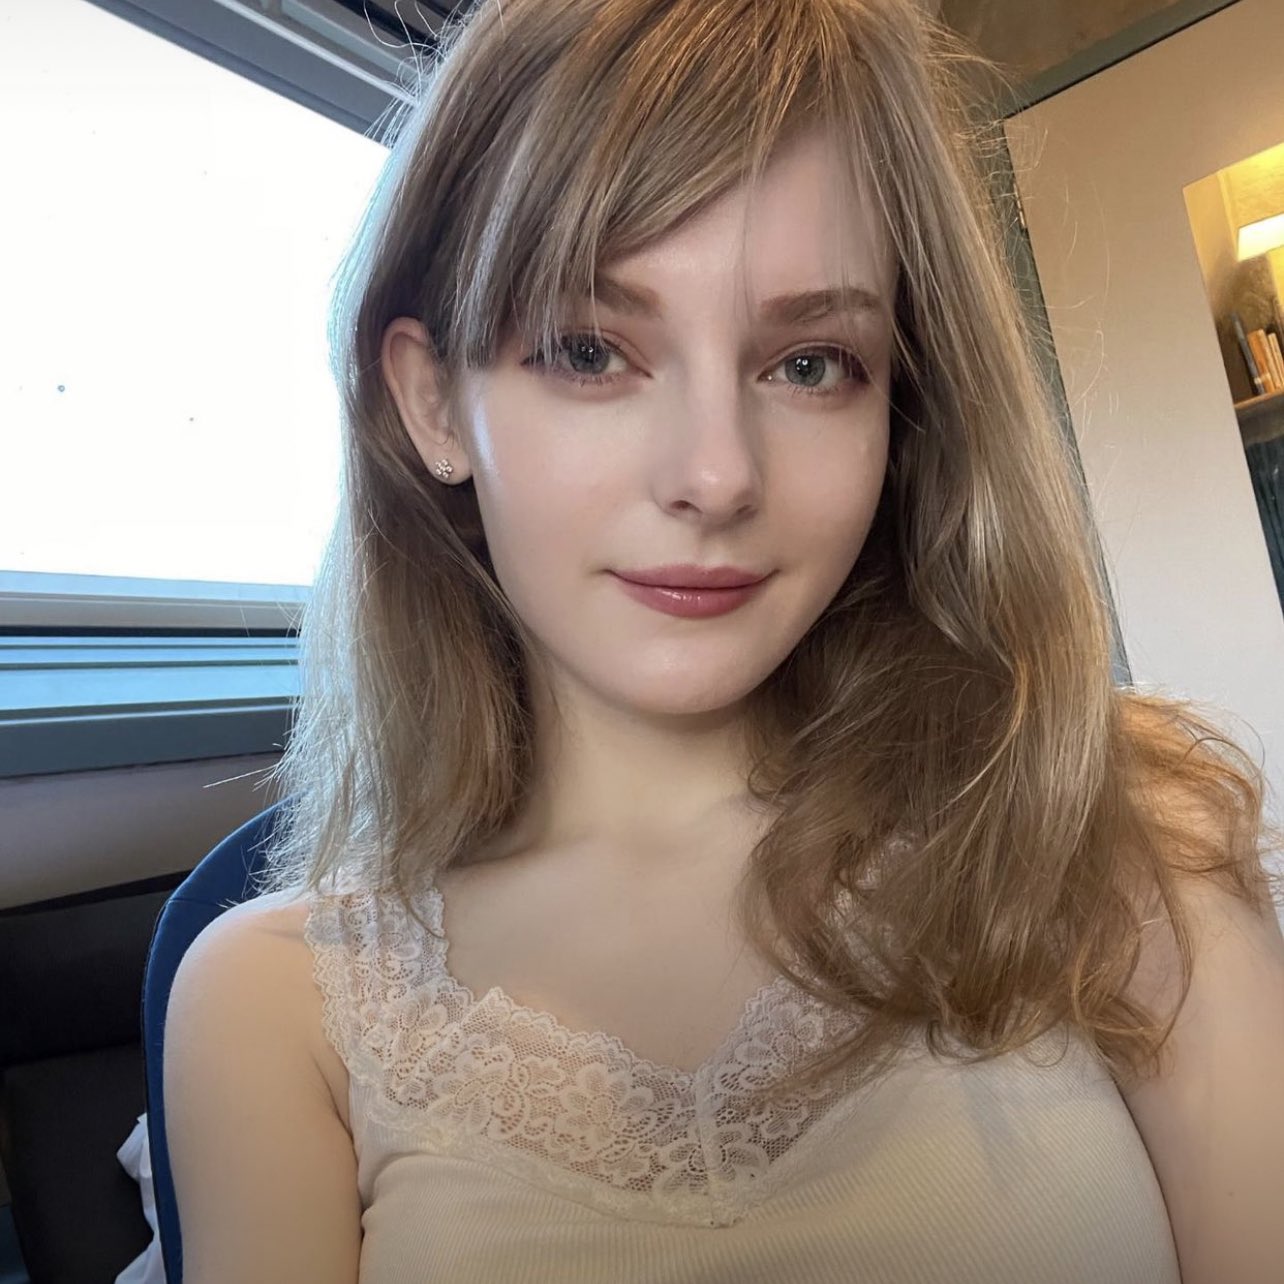 Ella Freya is the model and face behind Ashley Graham in the